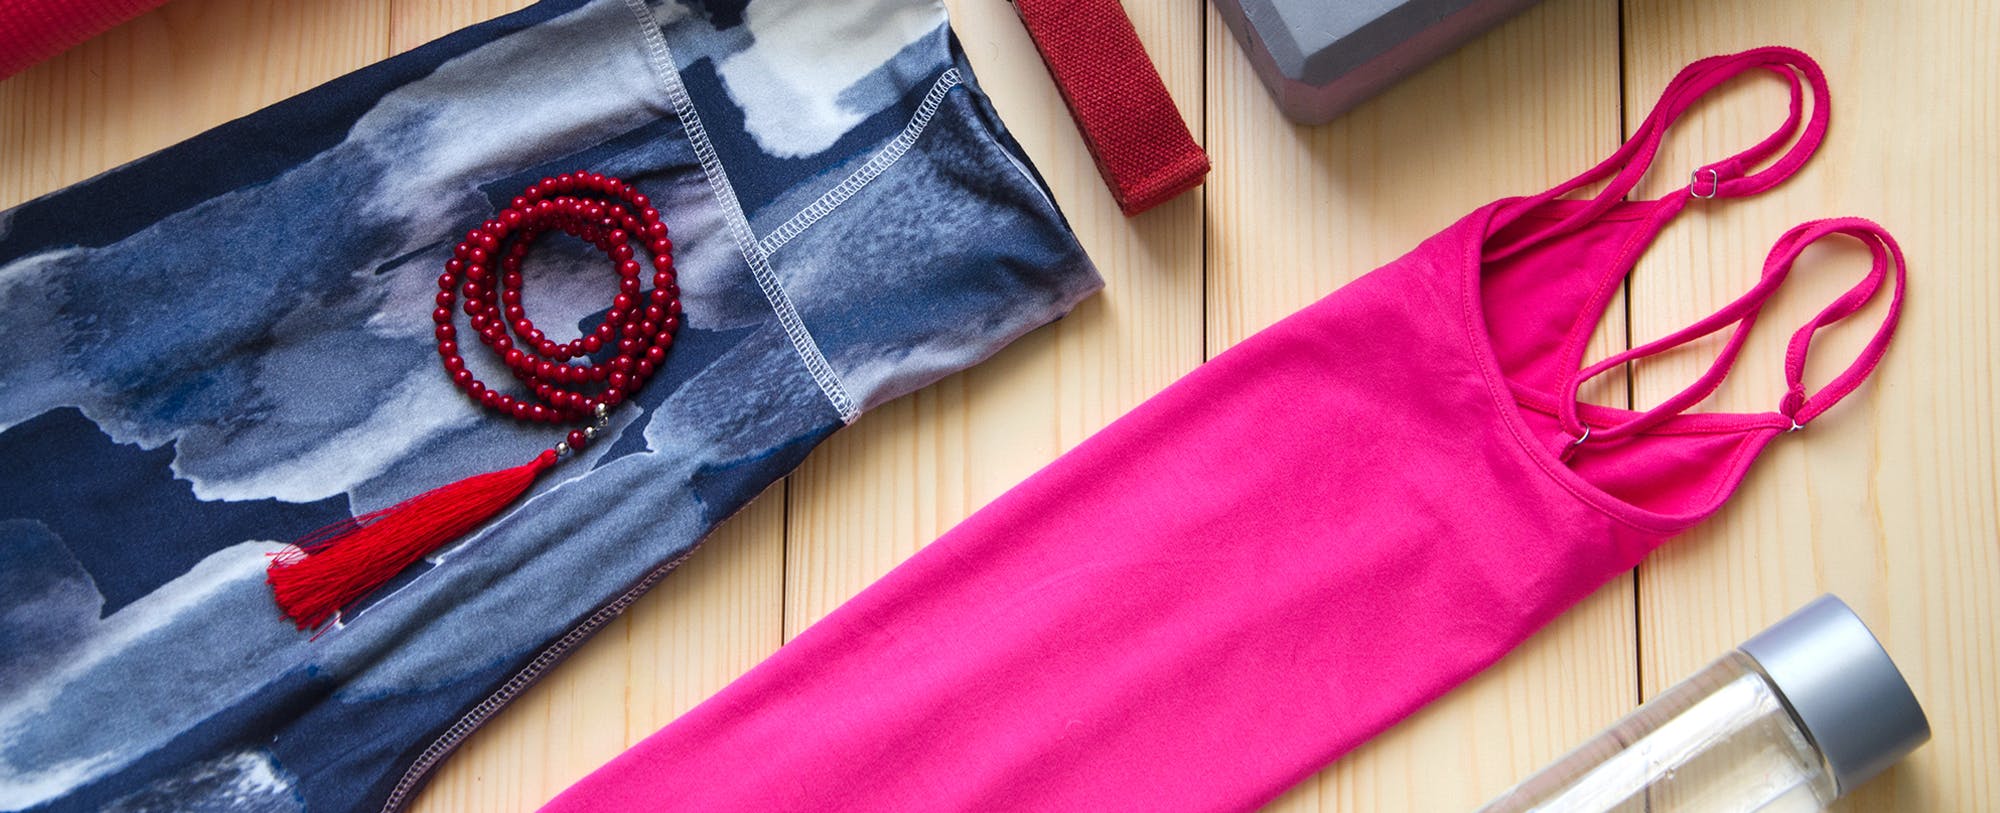 6 Questions to Choose the Perfect Yoga Outfit